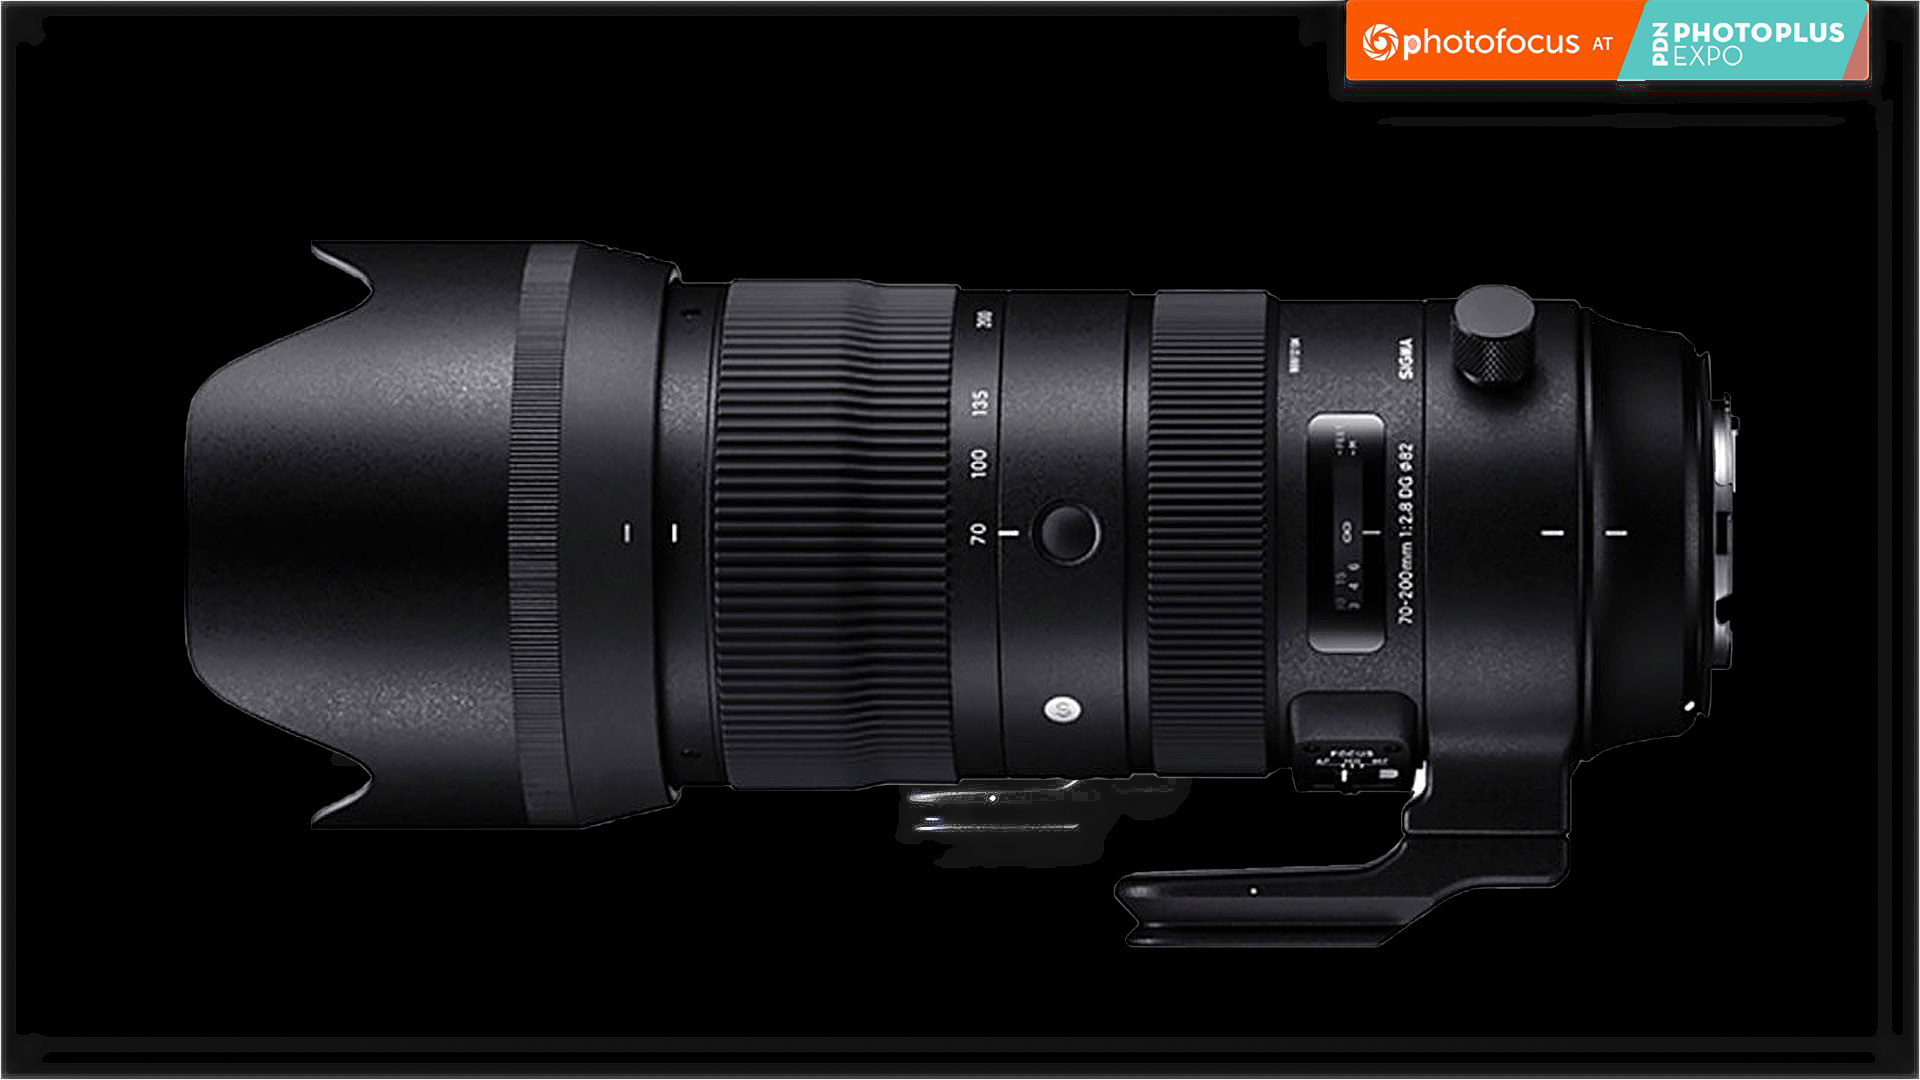 Sigma's new 70-200mm f/2.8 Sports zoom lens